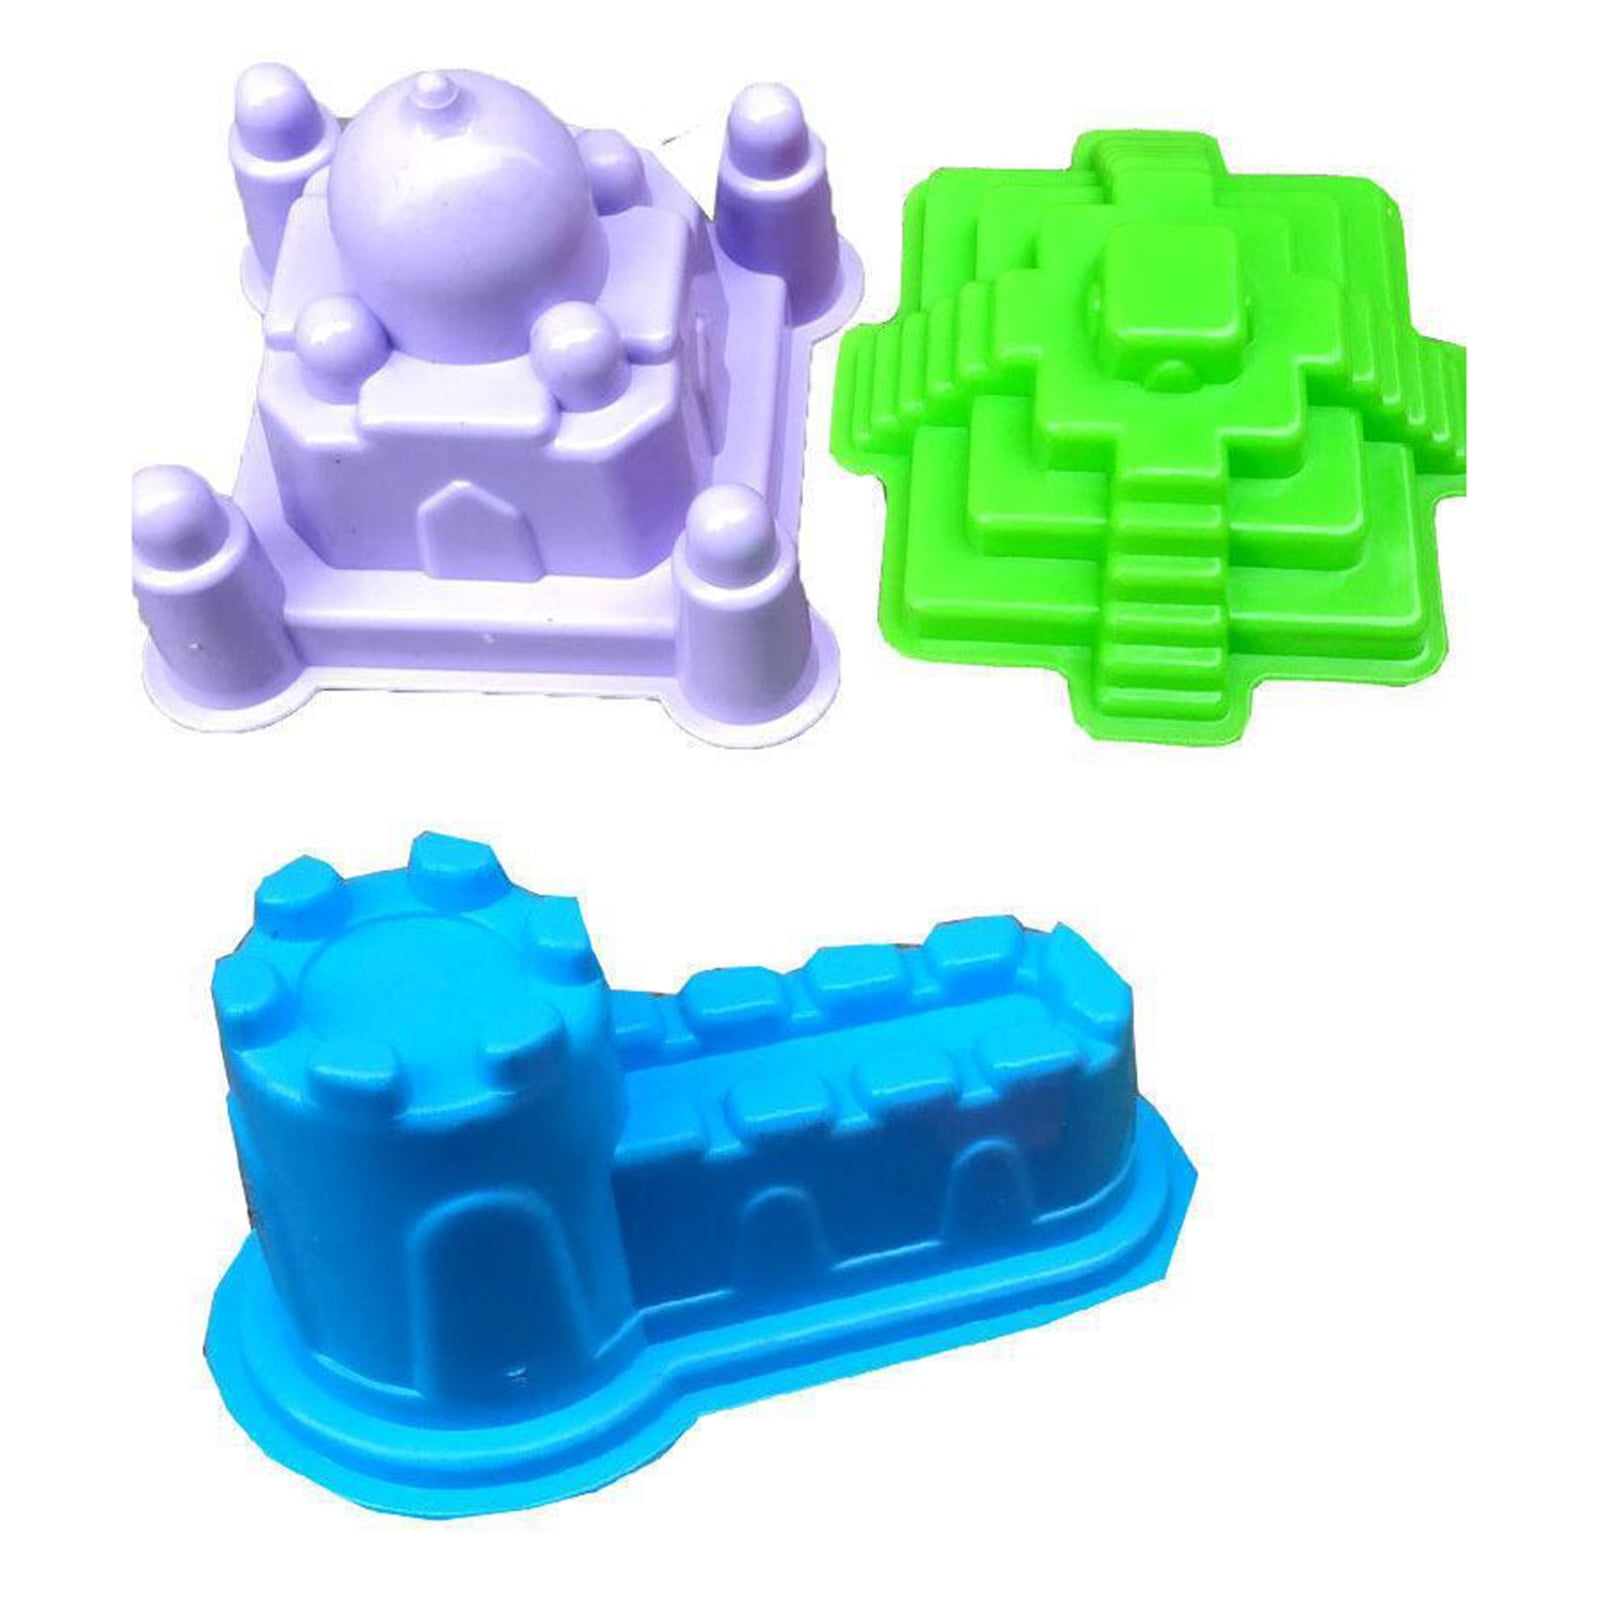 Toy Mold Set: Over 297 Royalty-Free Licensable Stock Illustrations &  Drawings